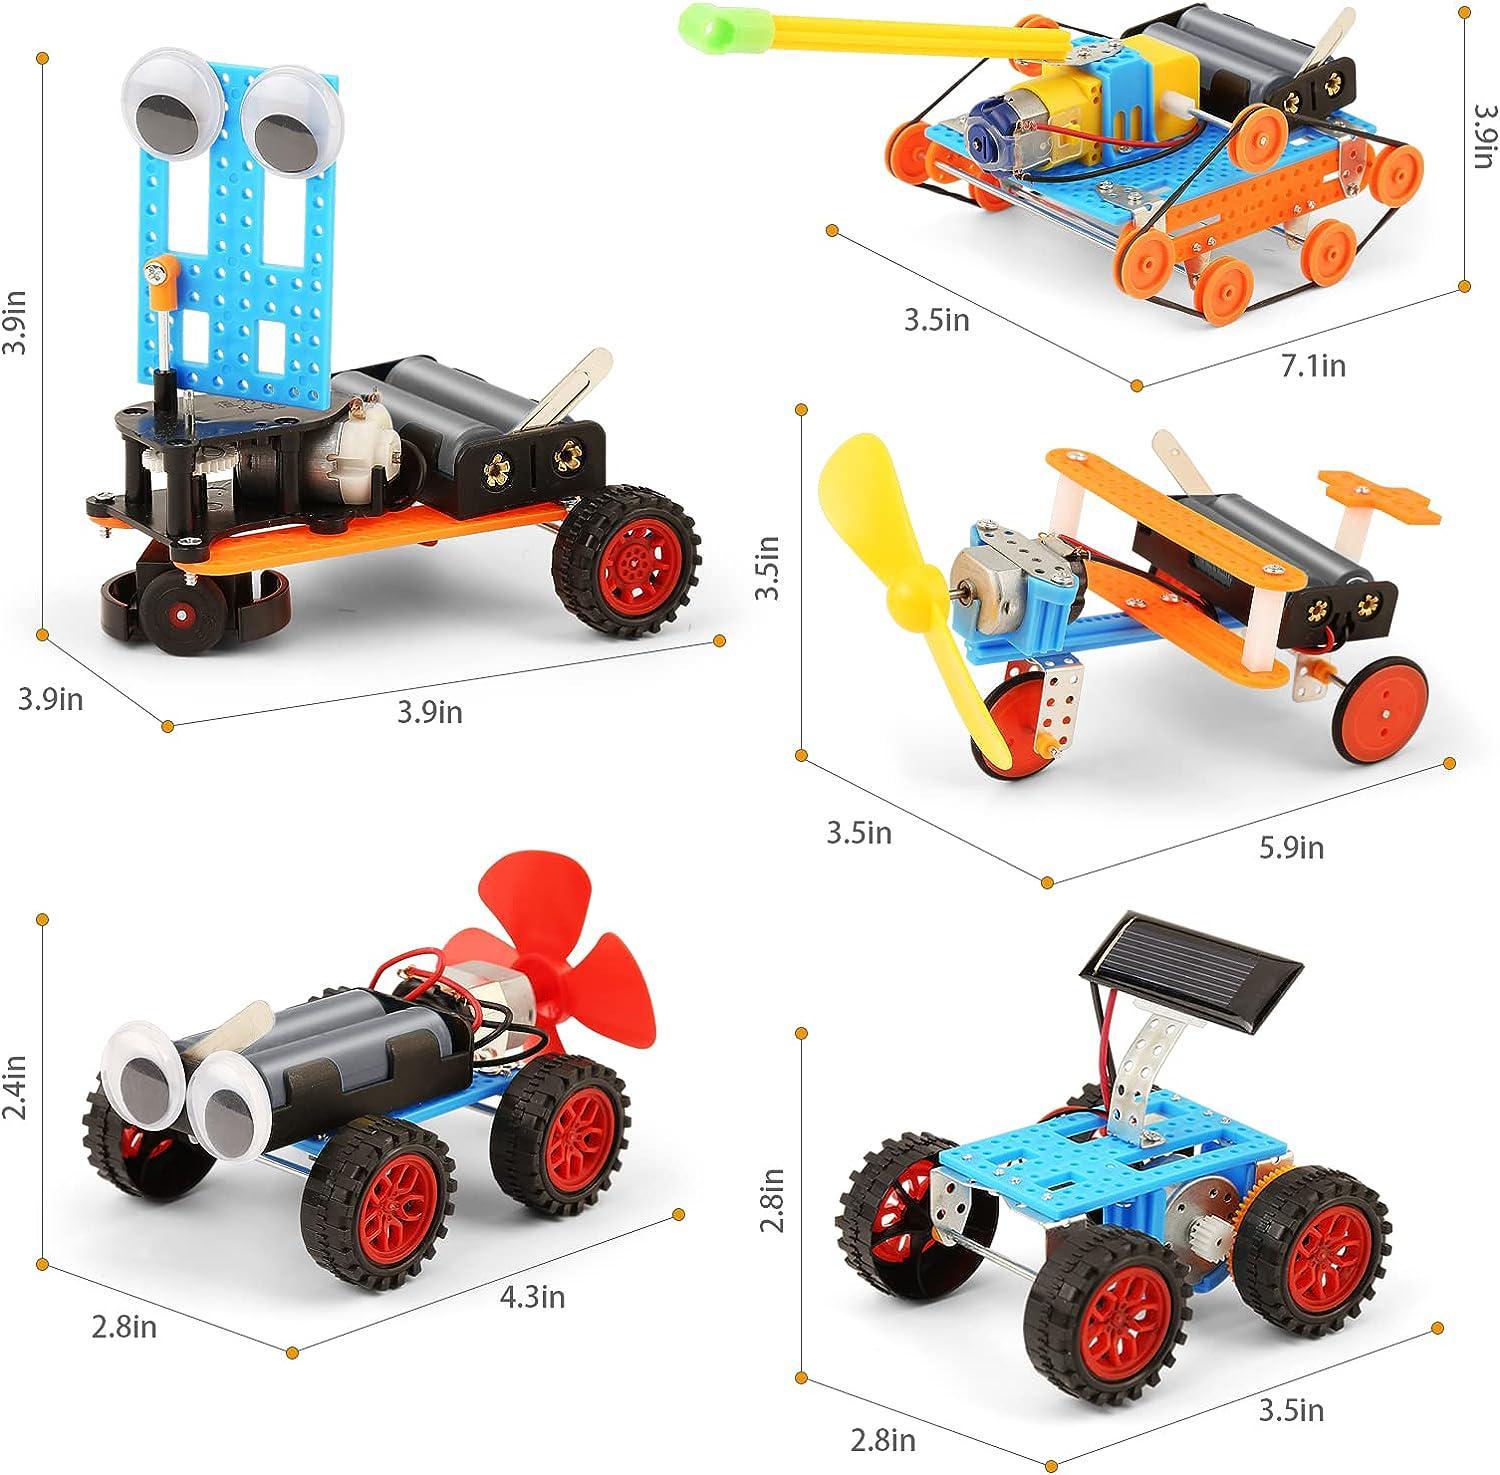  6 In 1 Wood Car Building Kits for Kids Ages 8-12, STEM